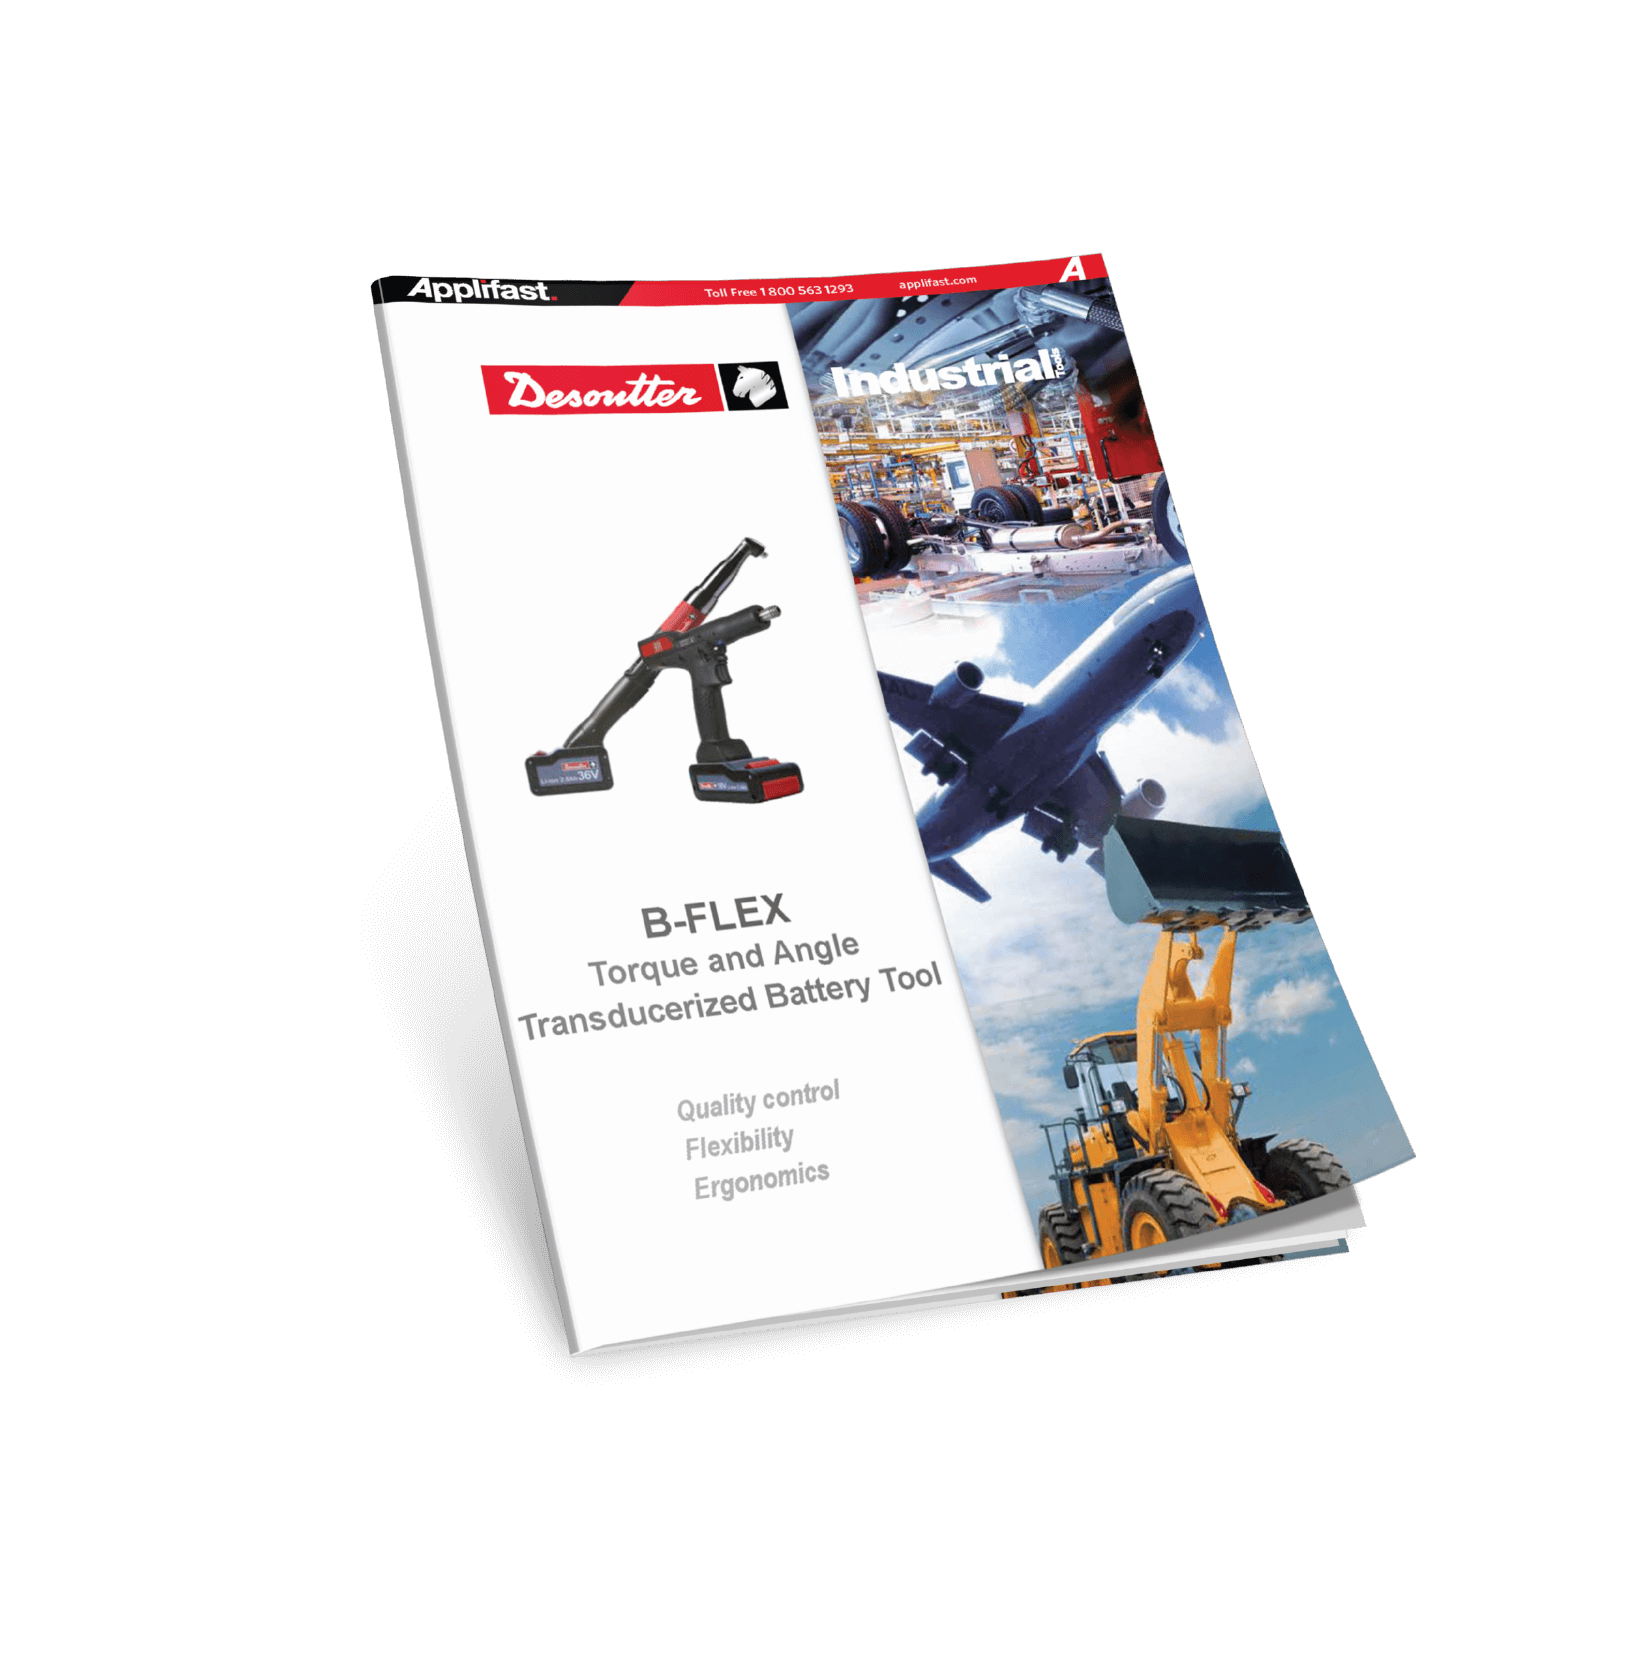 APPLIFAST - DESOUTTER B-FLEX TORQUE AND ANGLE TRANSDUCERIZED BATTERY TOOL CATALOGUE